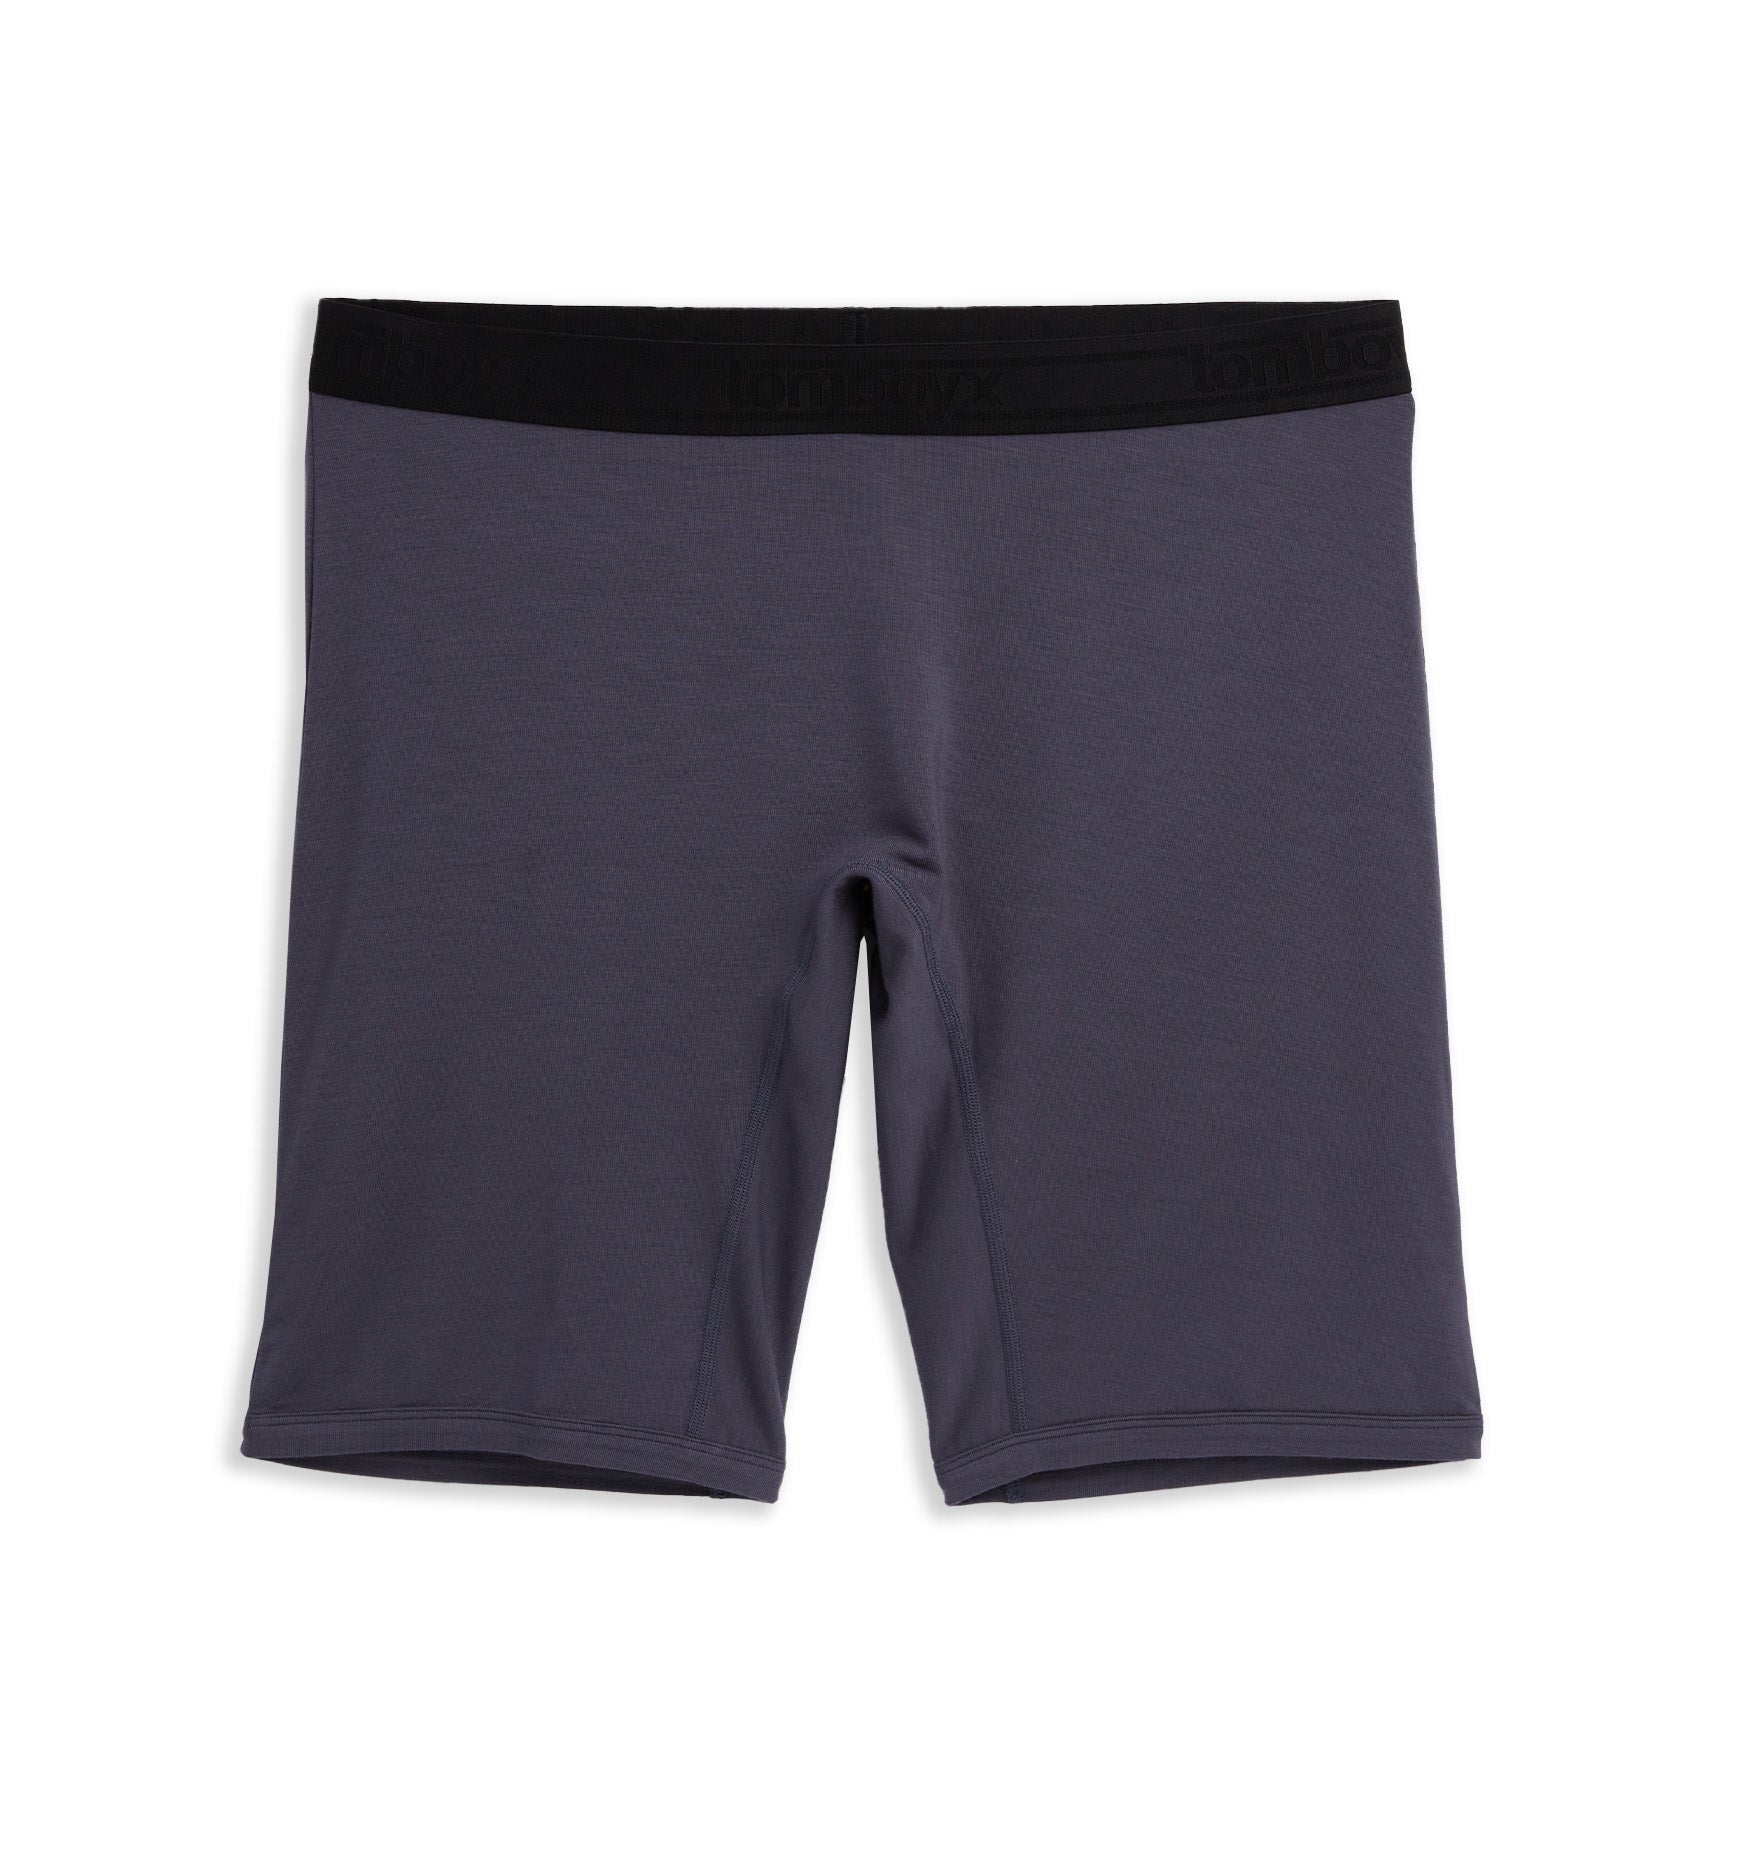 9 Inch Boxer Briefs  TomboyX - Comfortable, Soft, Breathable Women's  Boxers Designed for Every Body